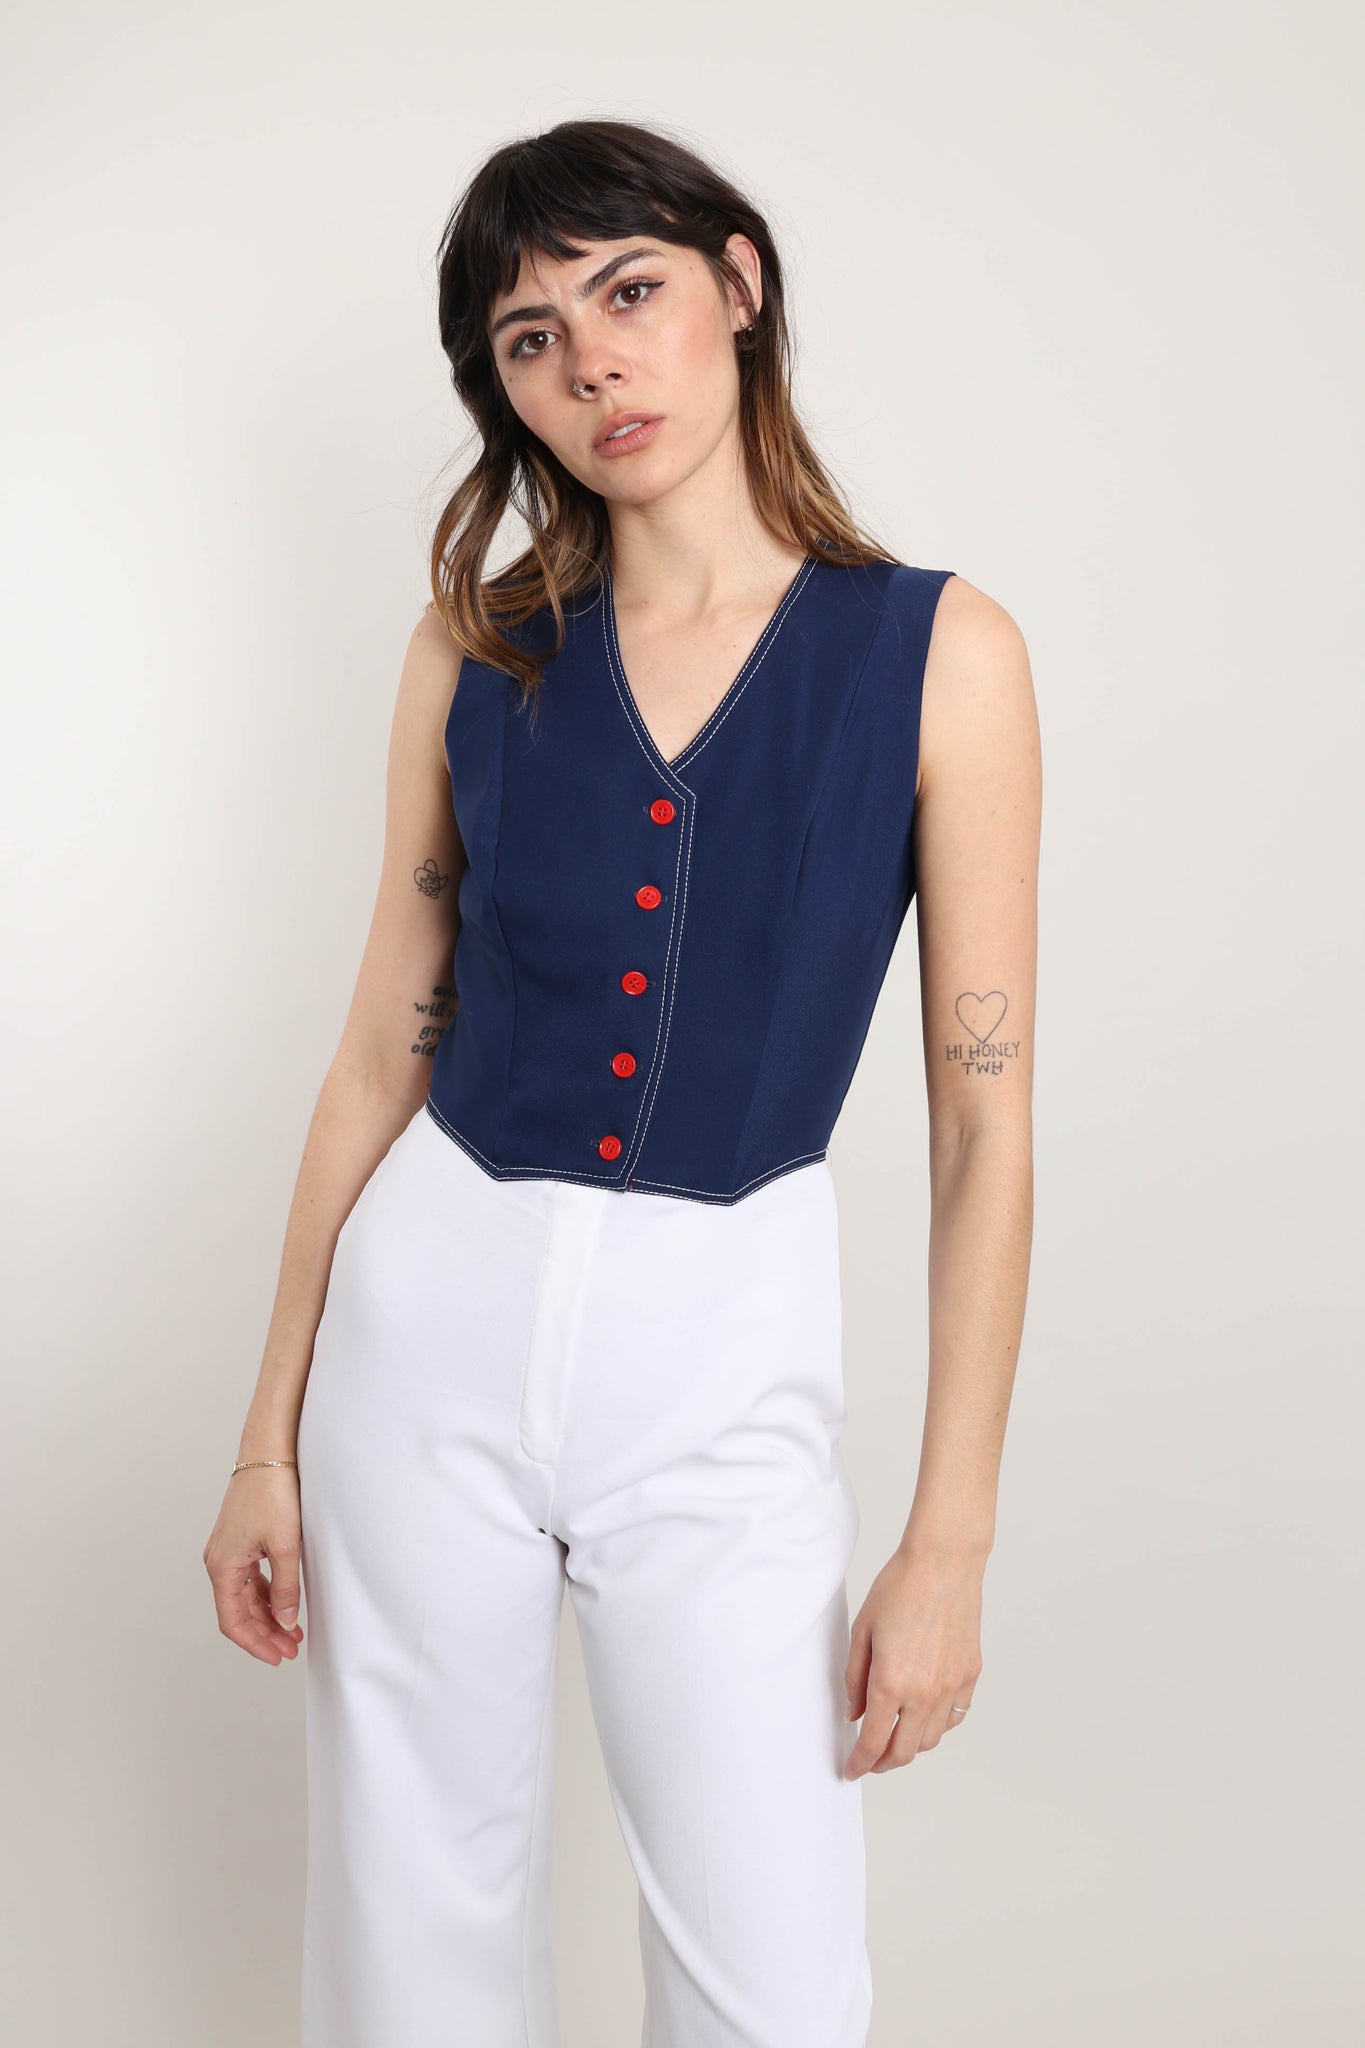 70s bell bottom v neck jumpsuit - any leads? : r/sewing